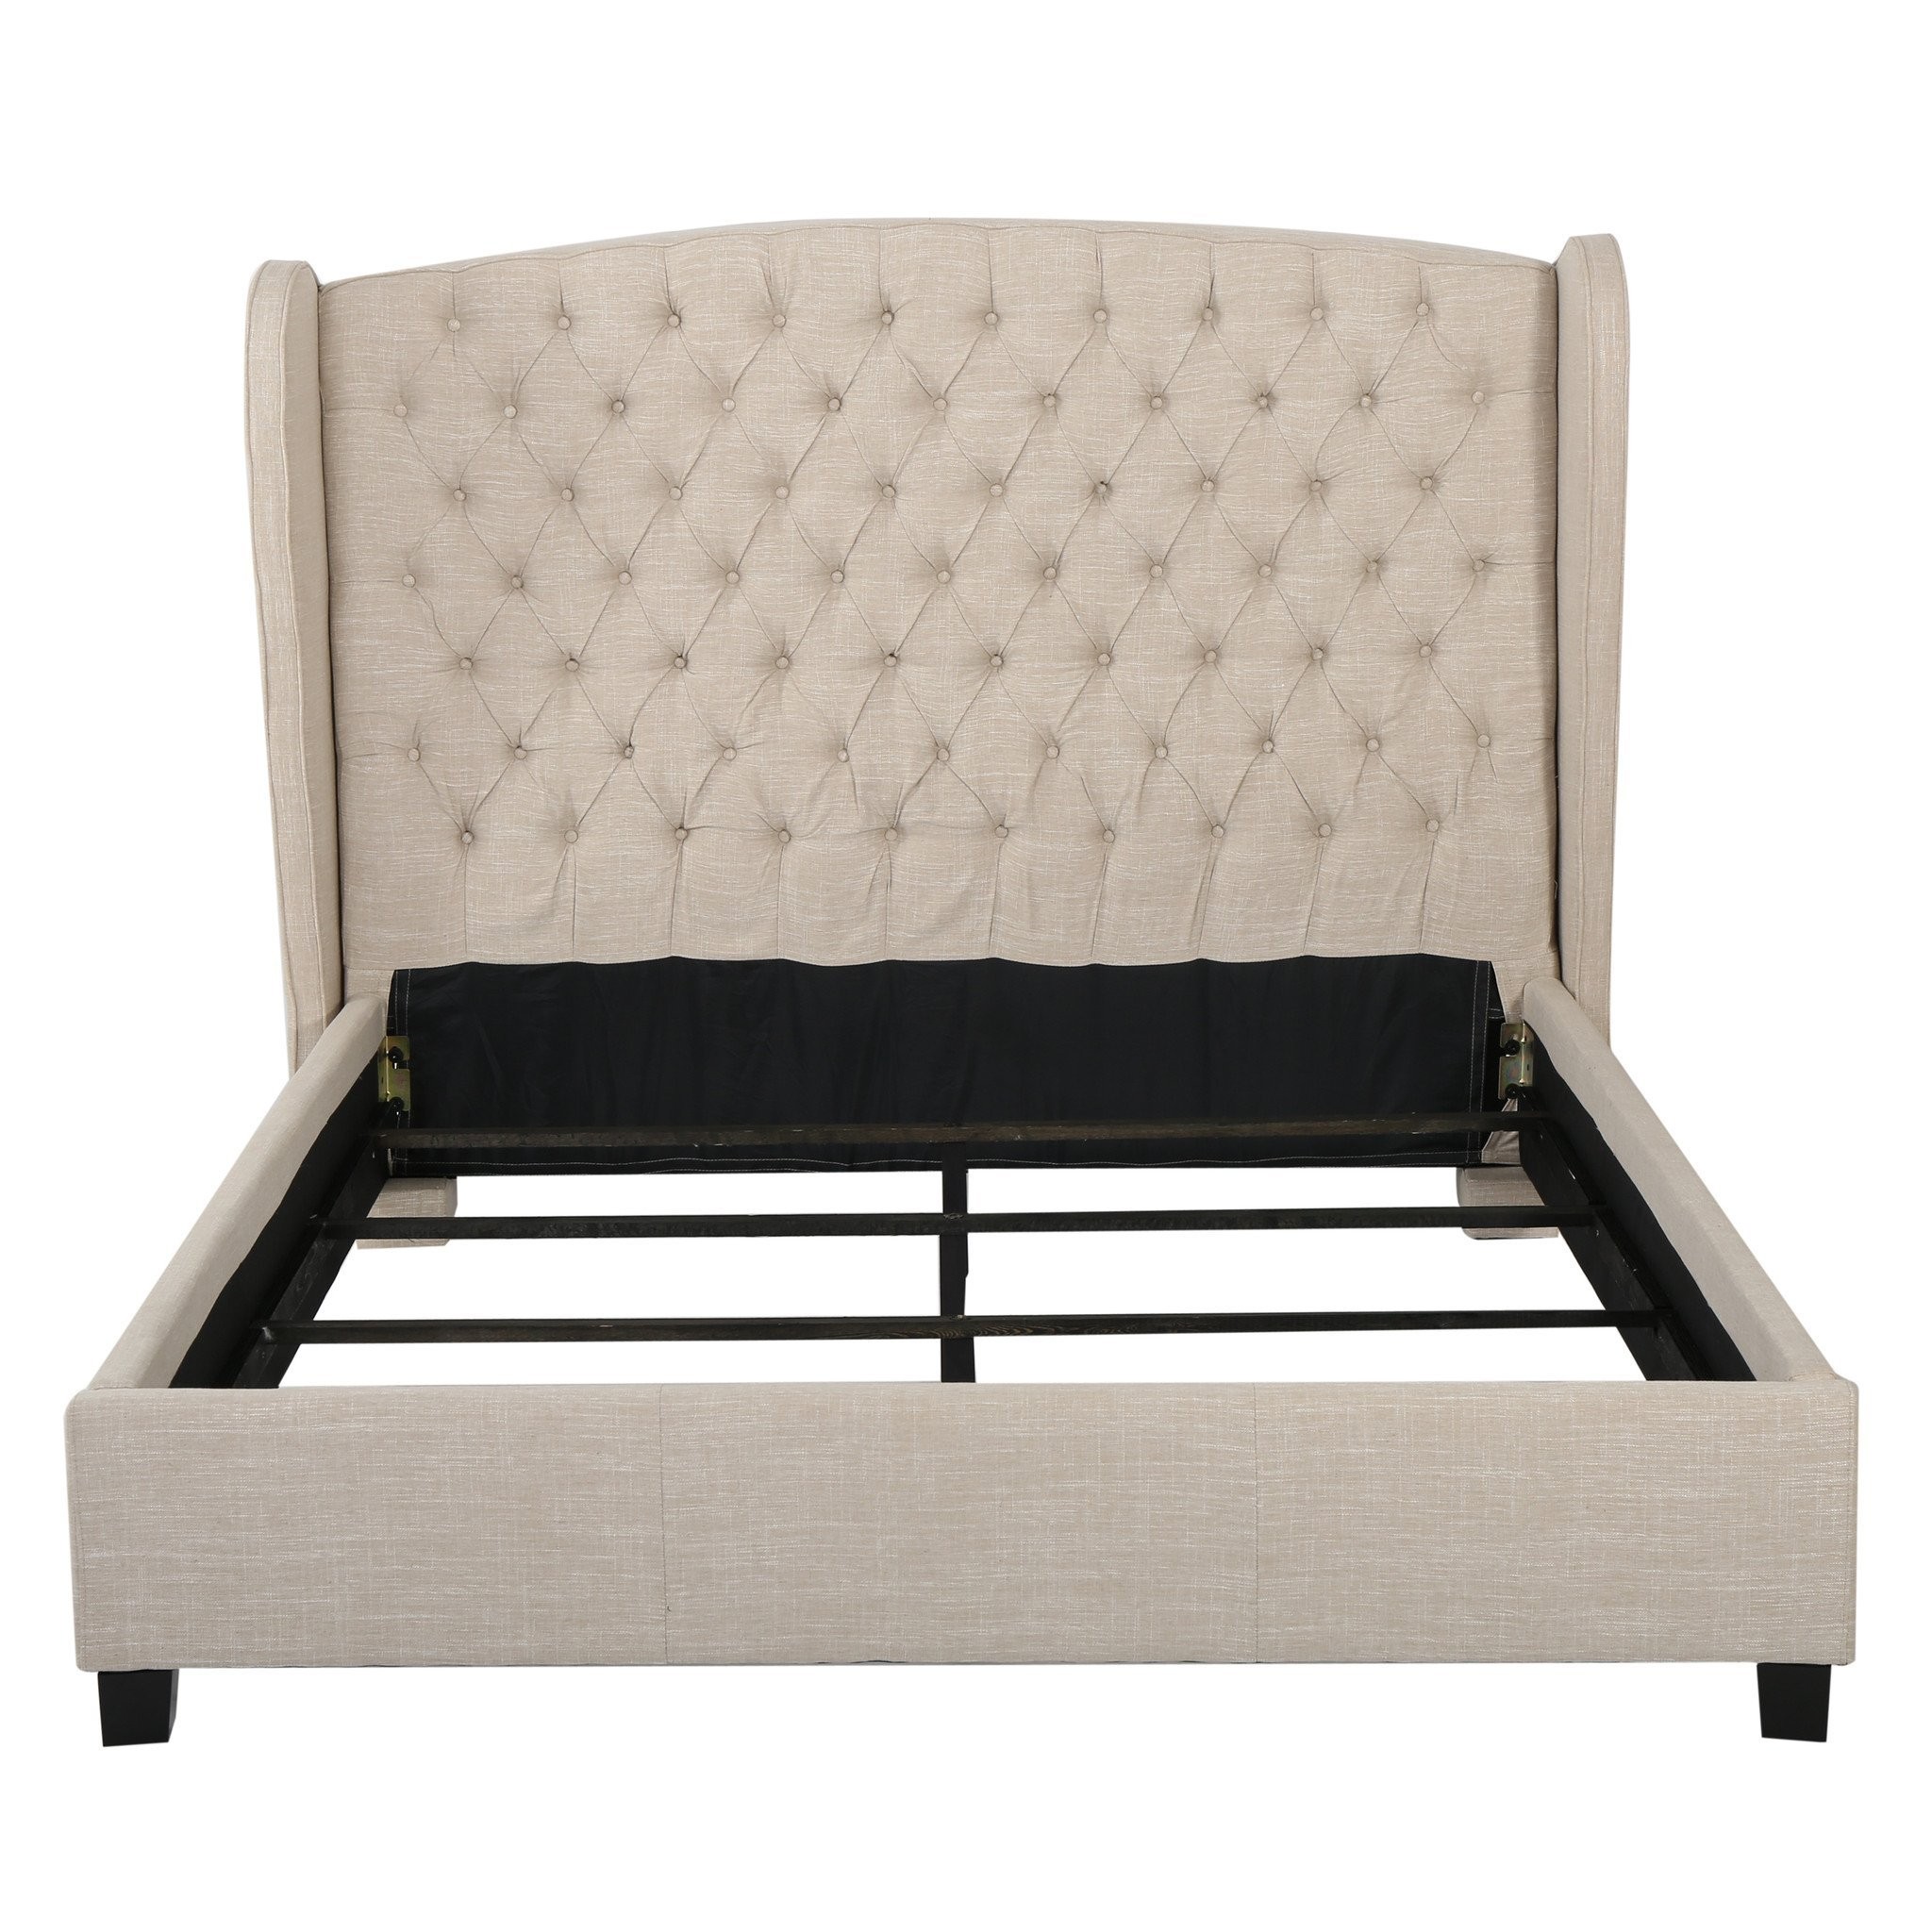 Denise Austin Home Lille Tufted Fabric Wingback Qu...